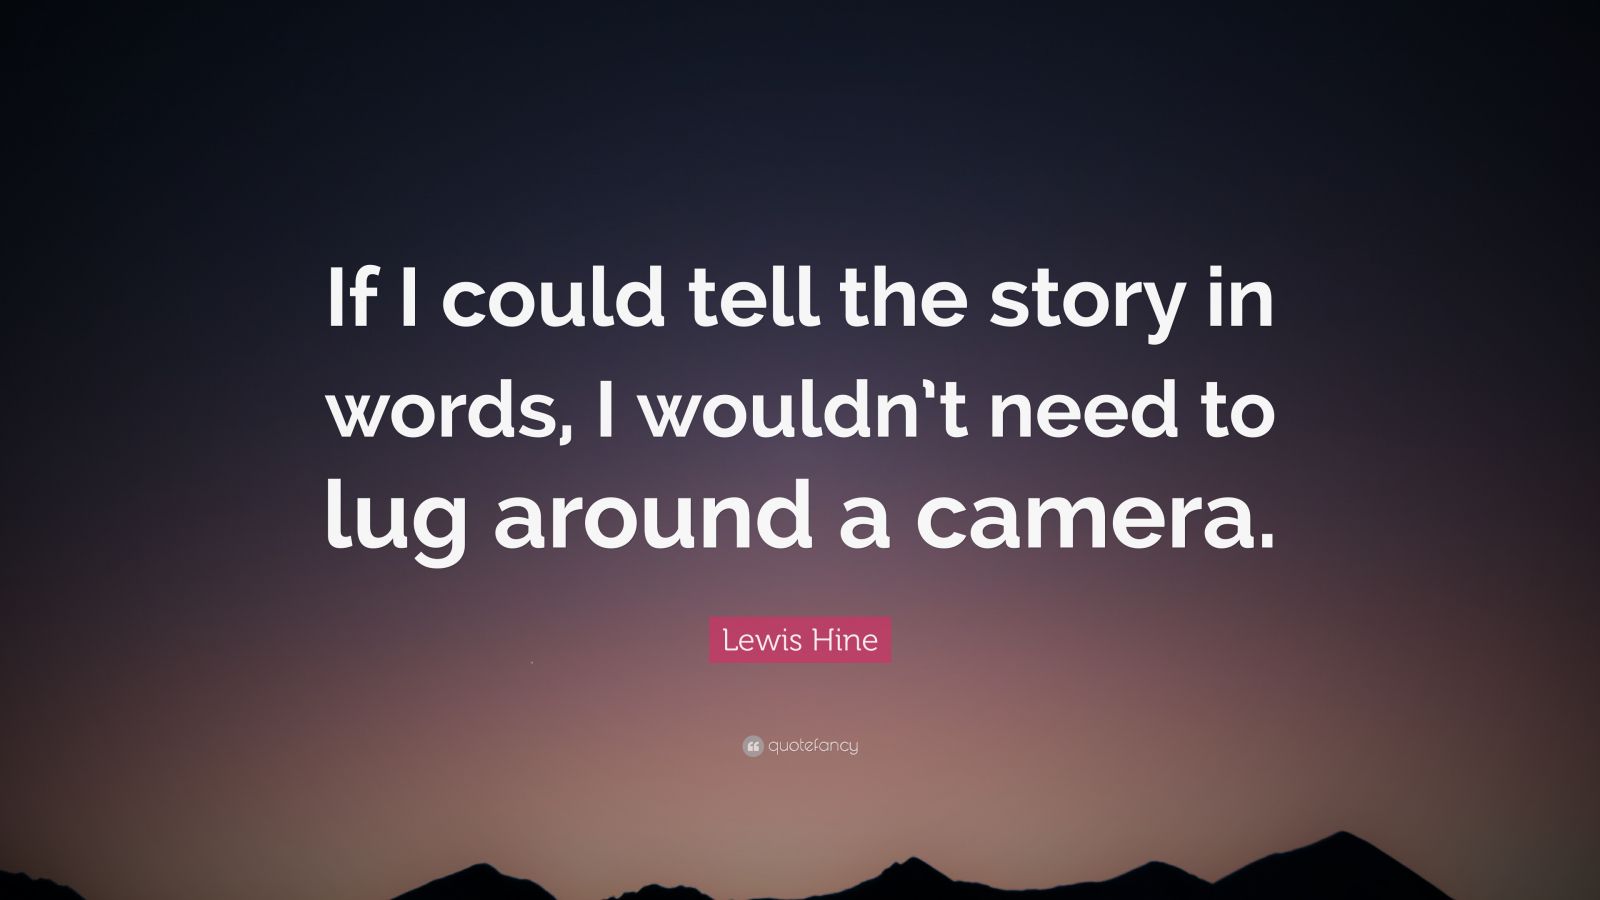 Lewis Hine Quote: "If I could tell the story in words, I wouldn't need to lug around a camera ...